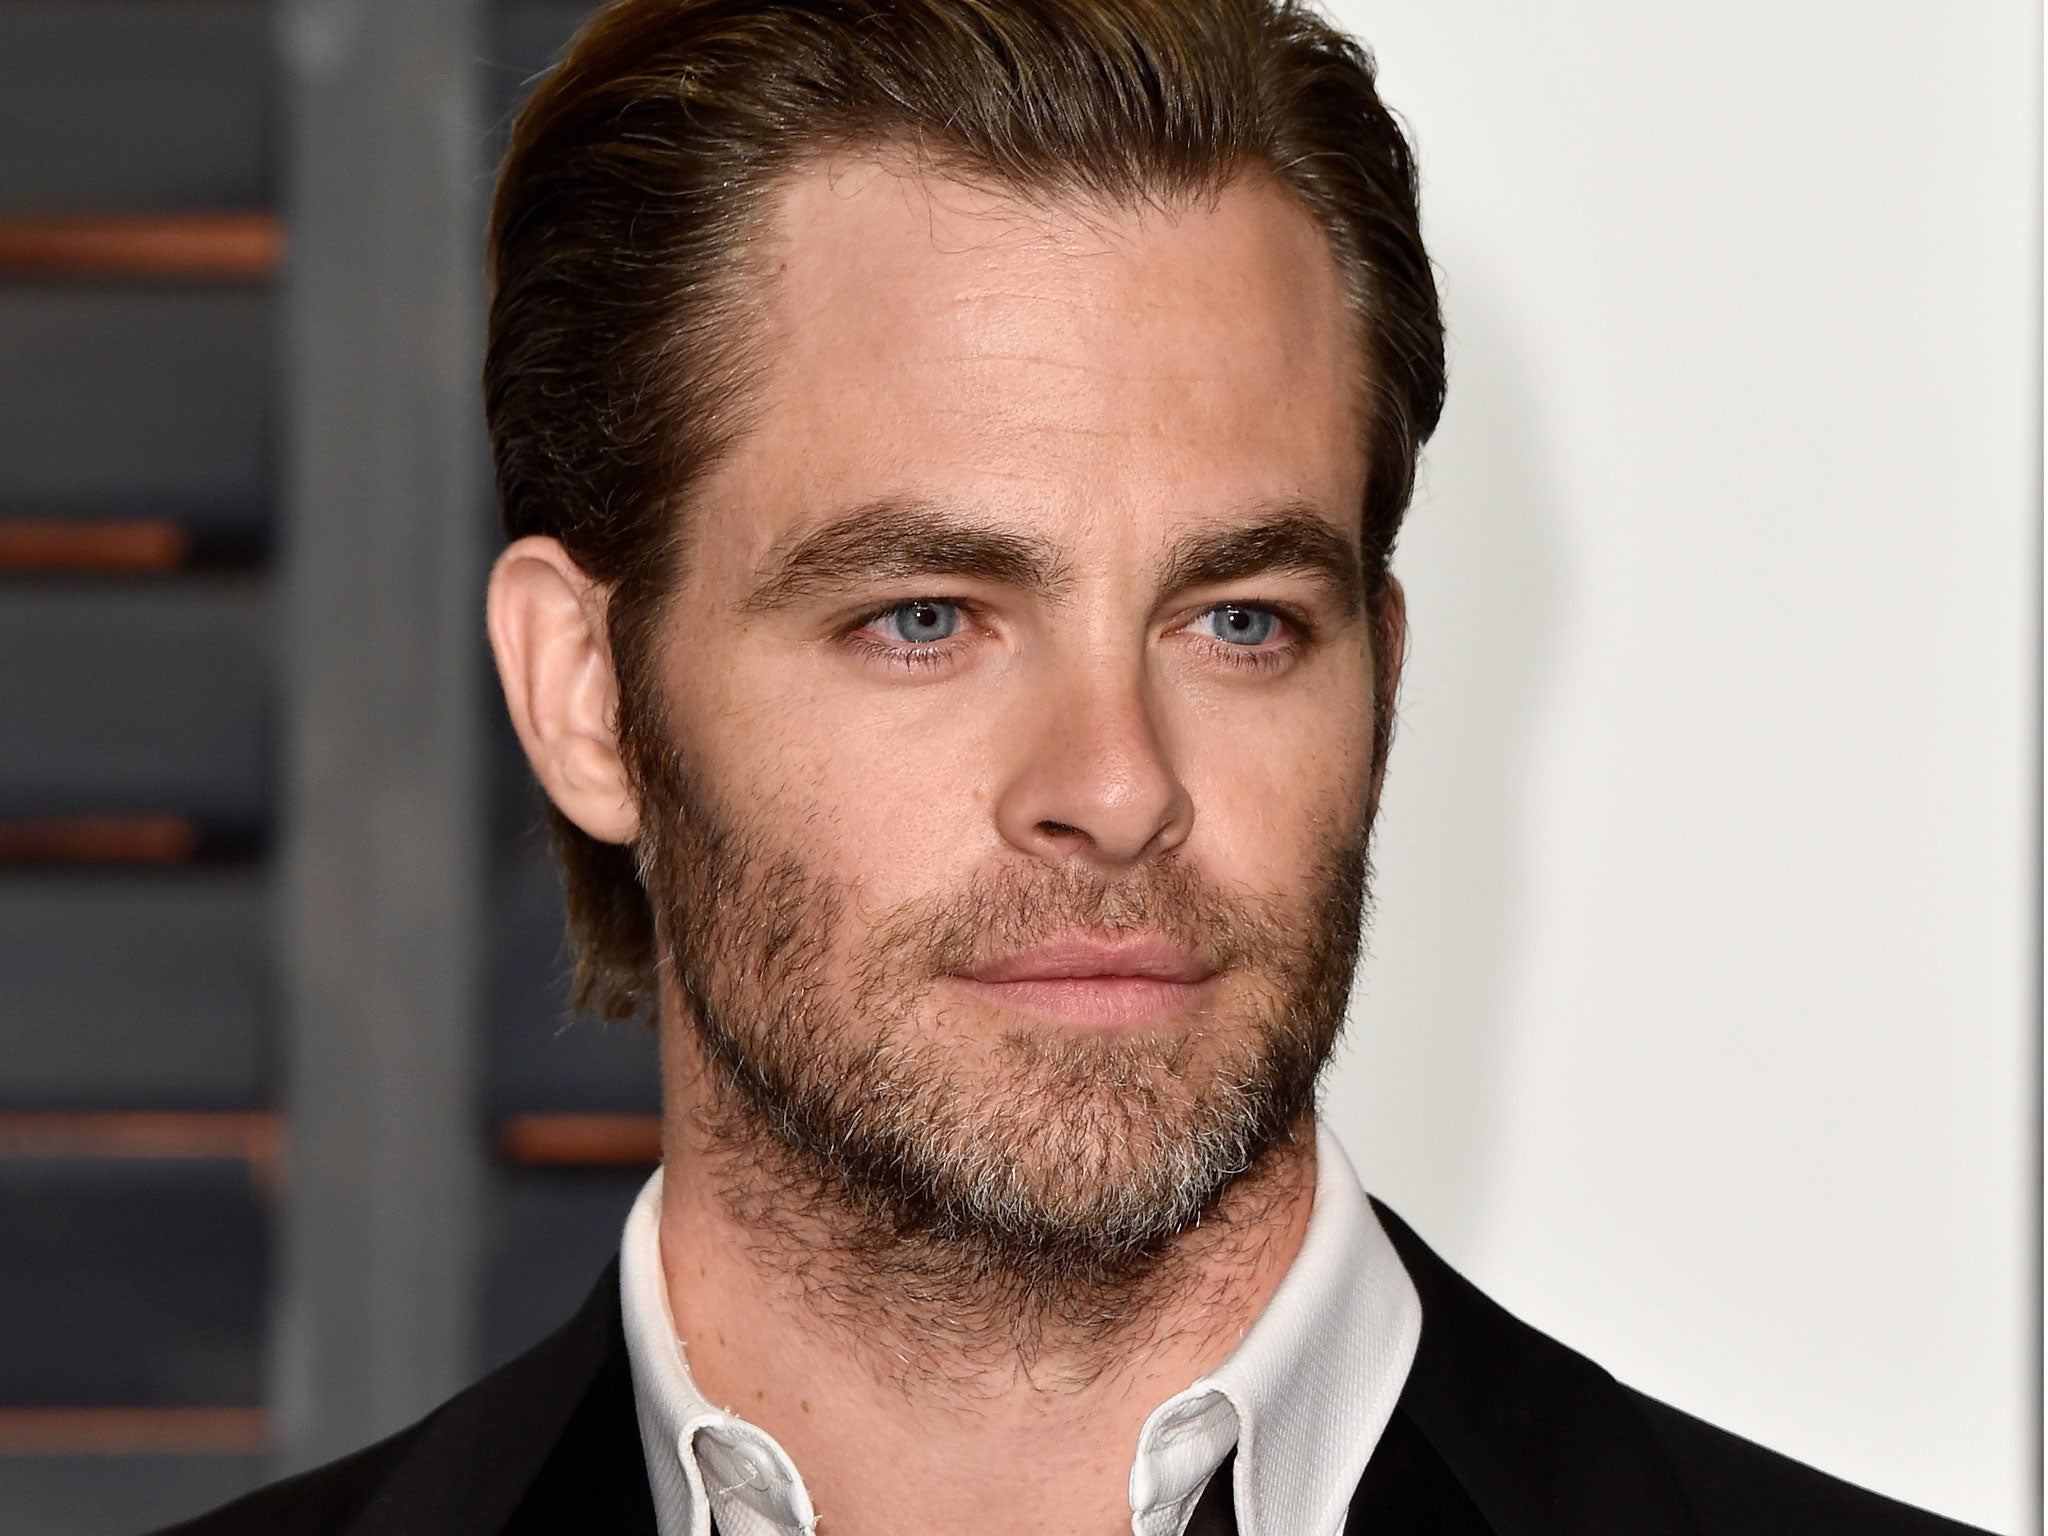 Chris Pine is set to star alongside Gal Gadot in the upcoming Wonder Woman film